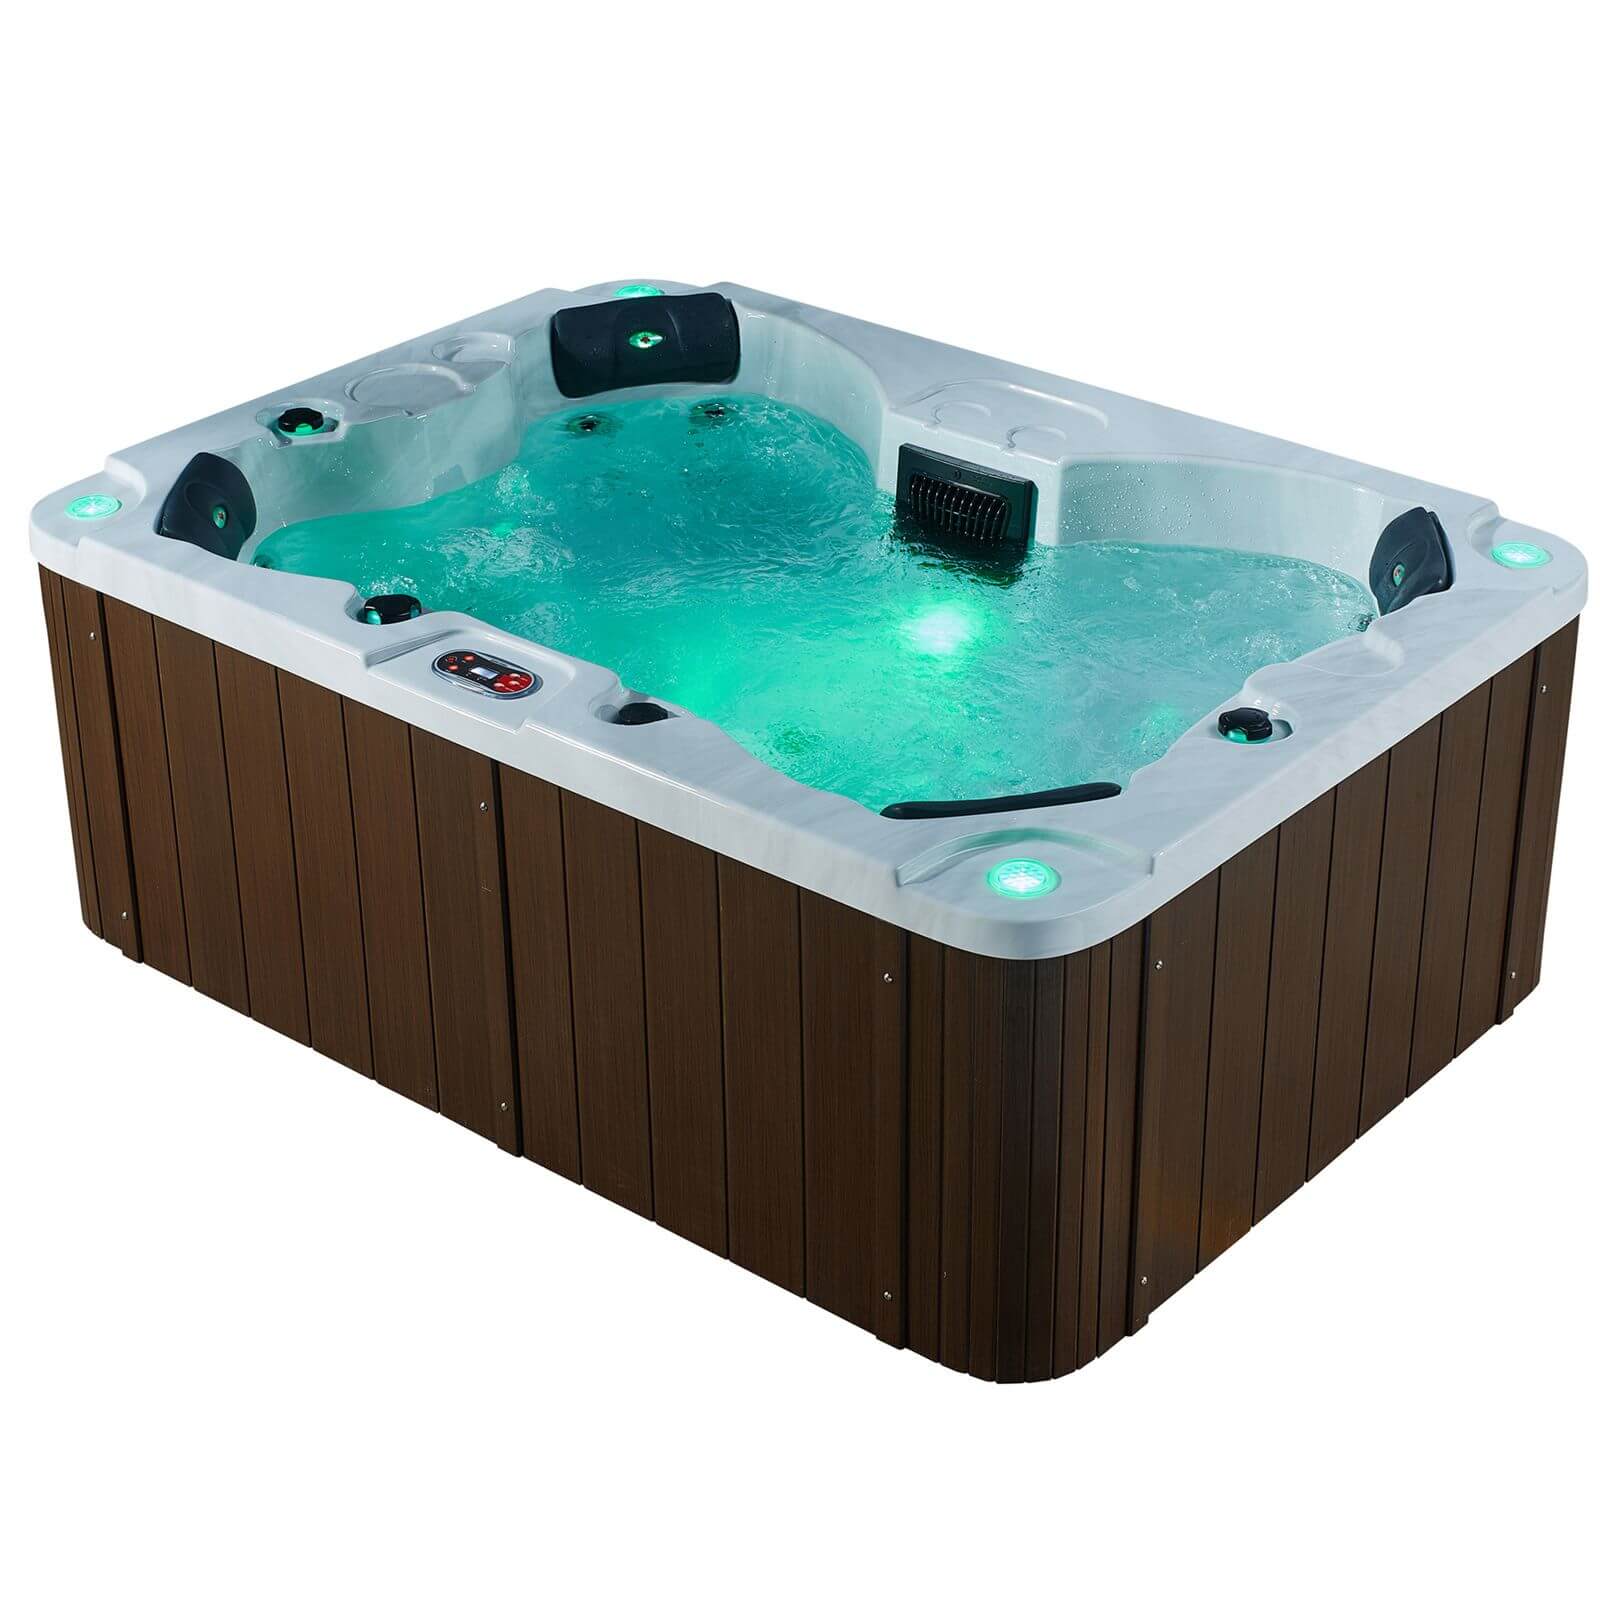 Canadian Spa Halifax Plug & Play 4 Person Hot Tub (Includes Free Delivery & Installation)